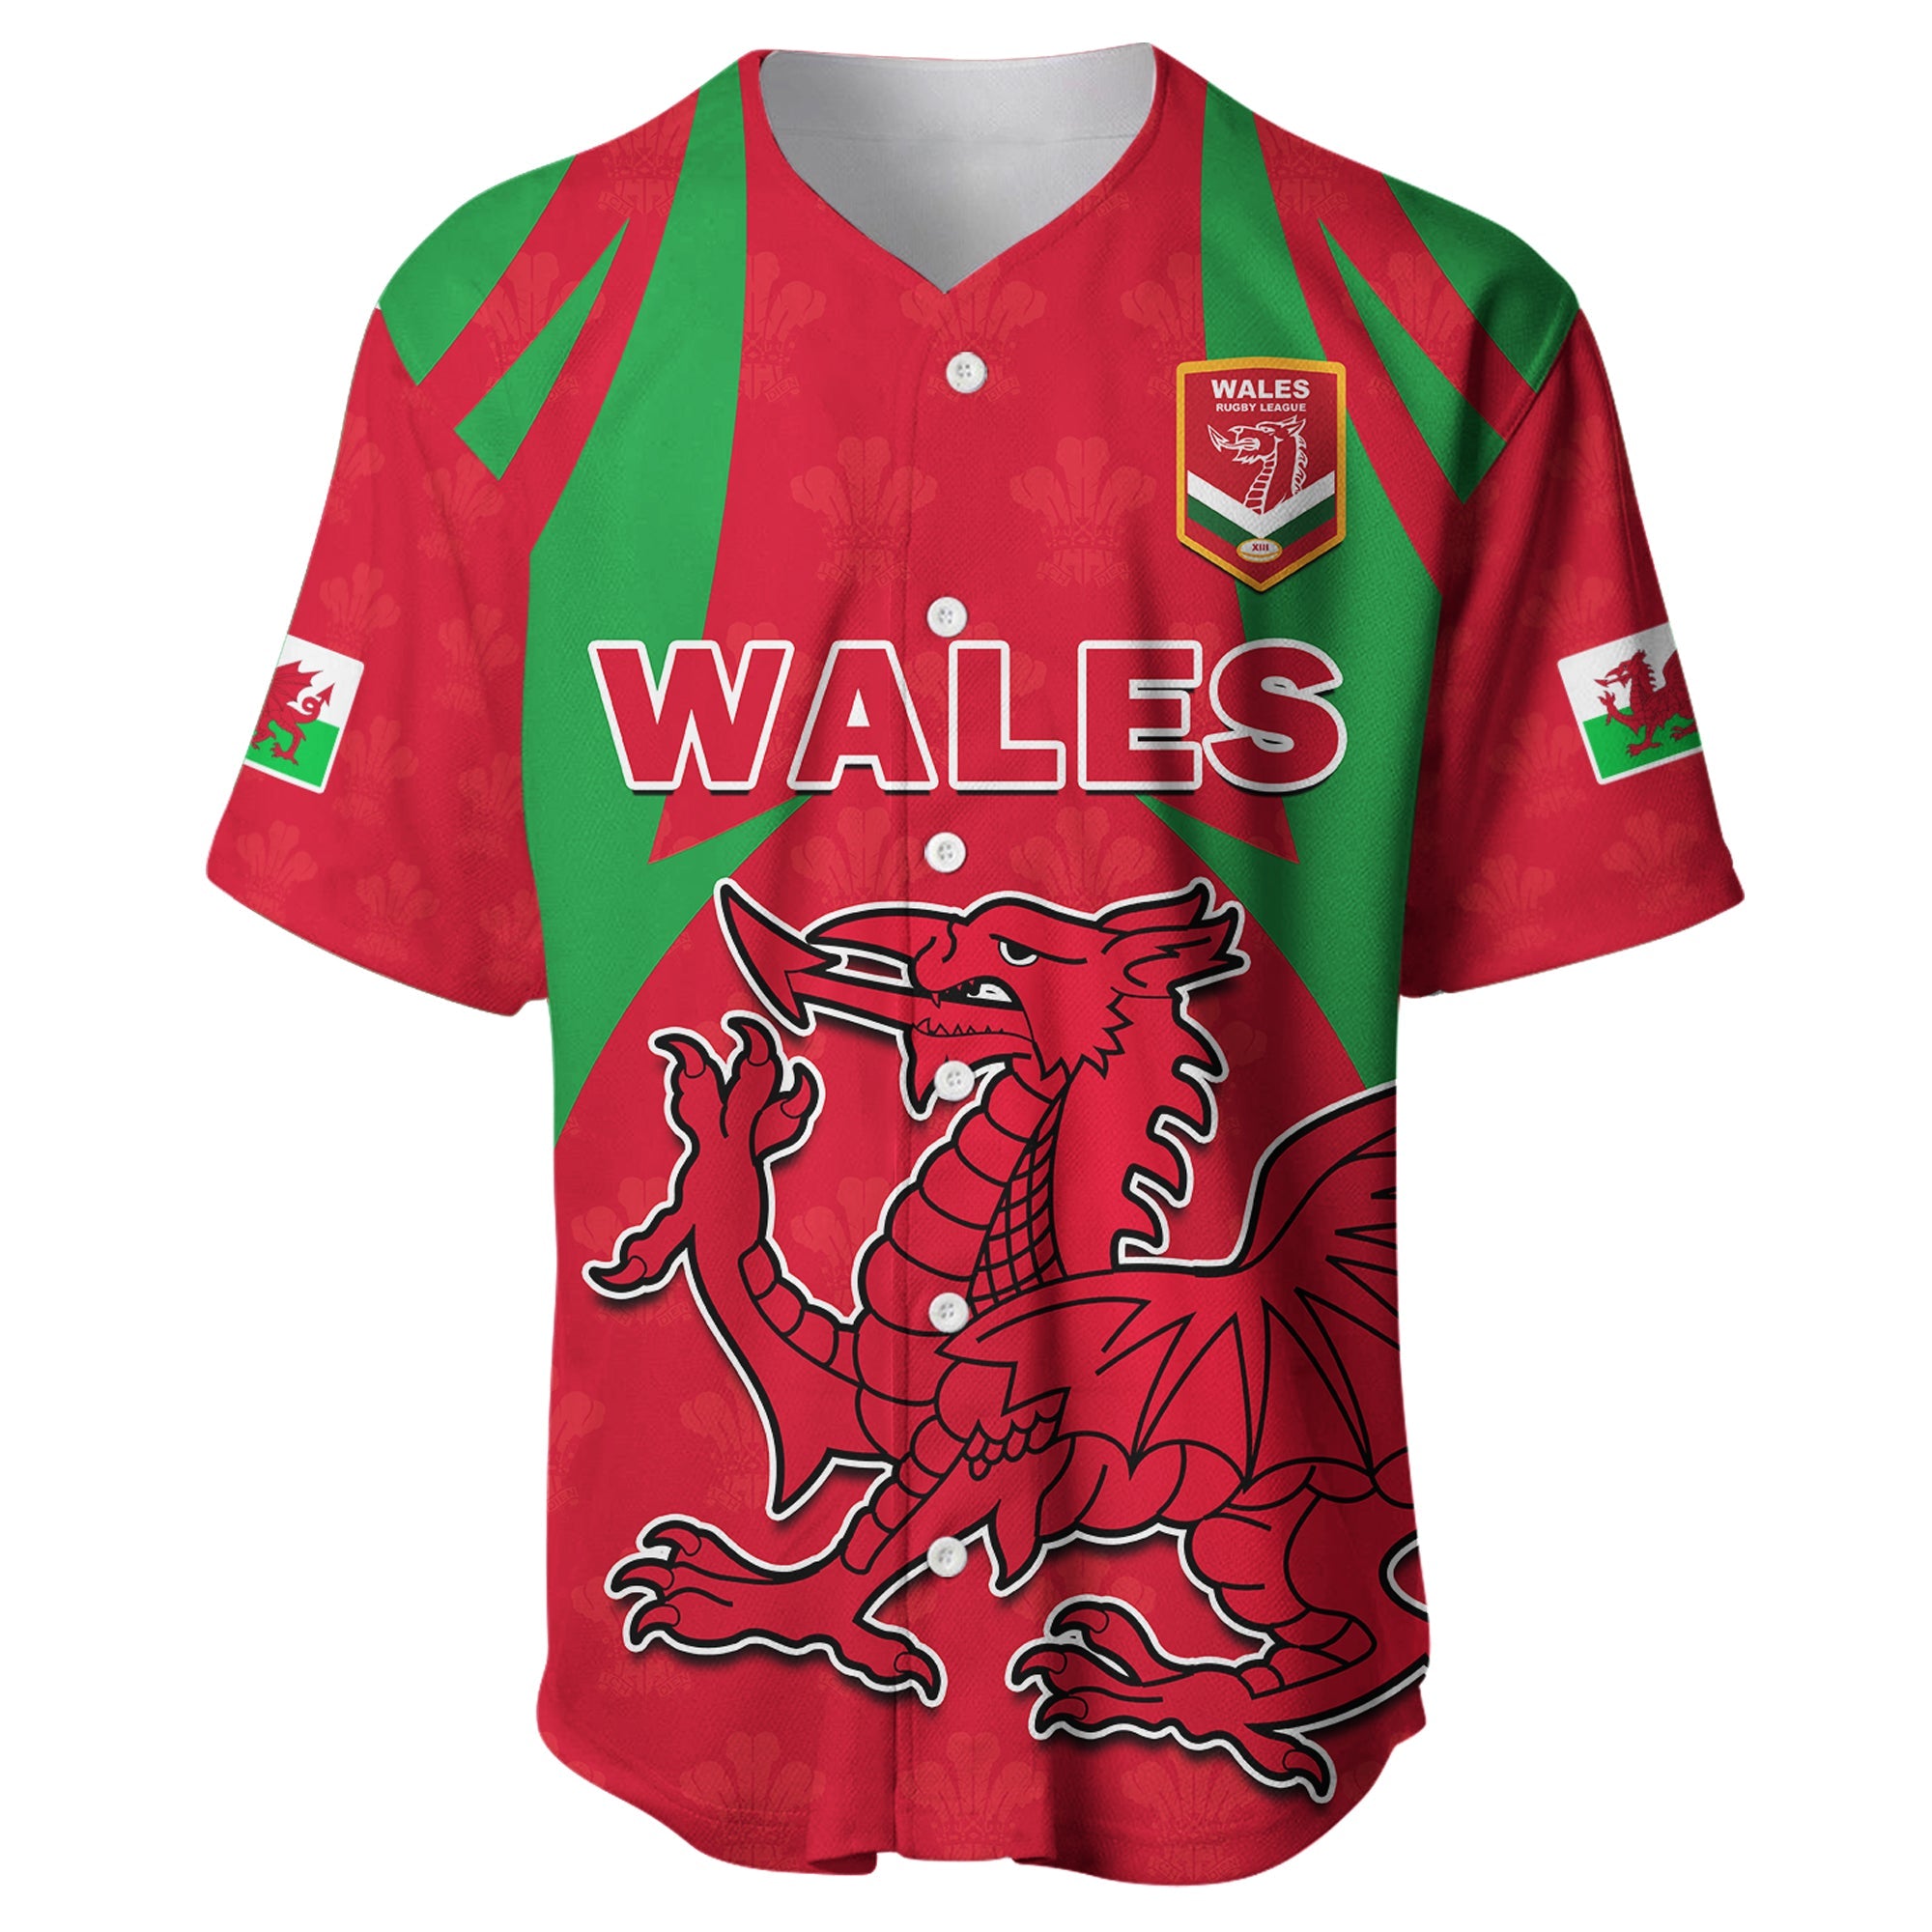 wales-rugby-baseball-jersey-the-dragons-national-team-come-on-cymru